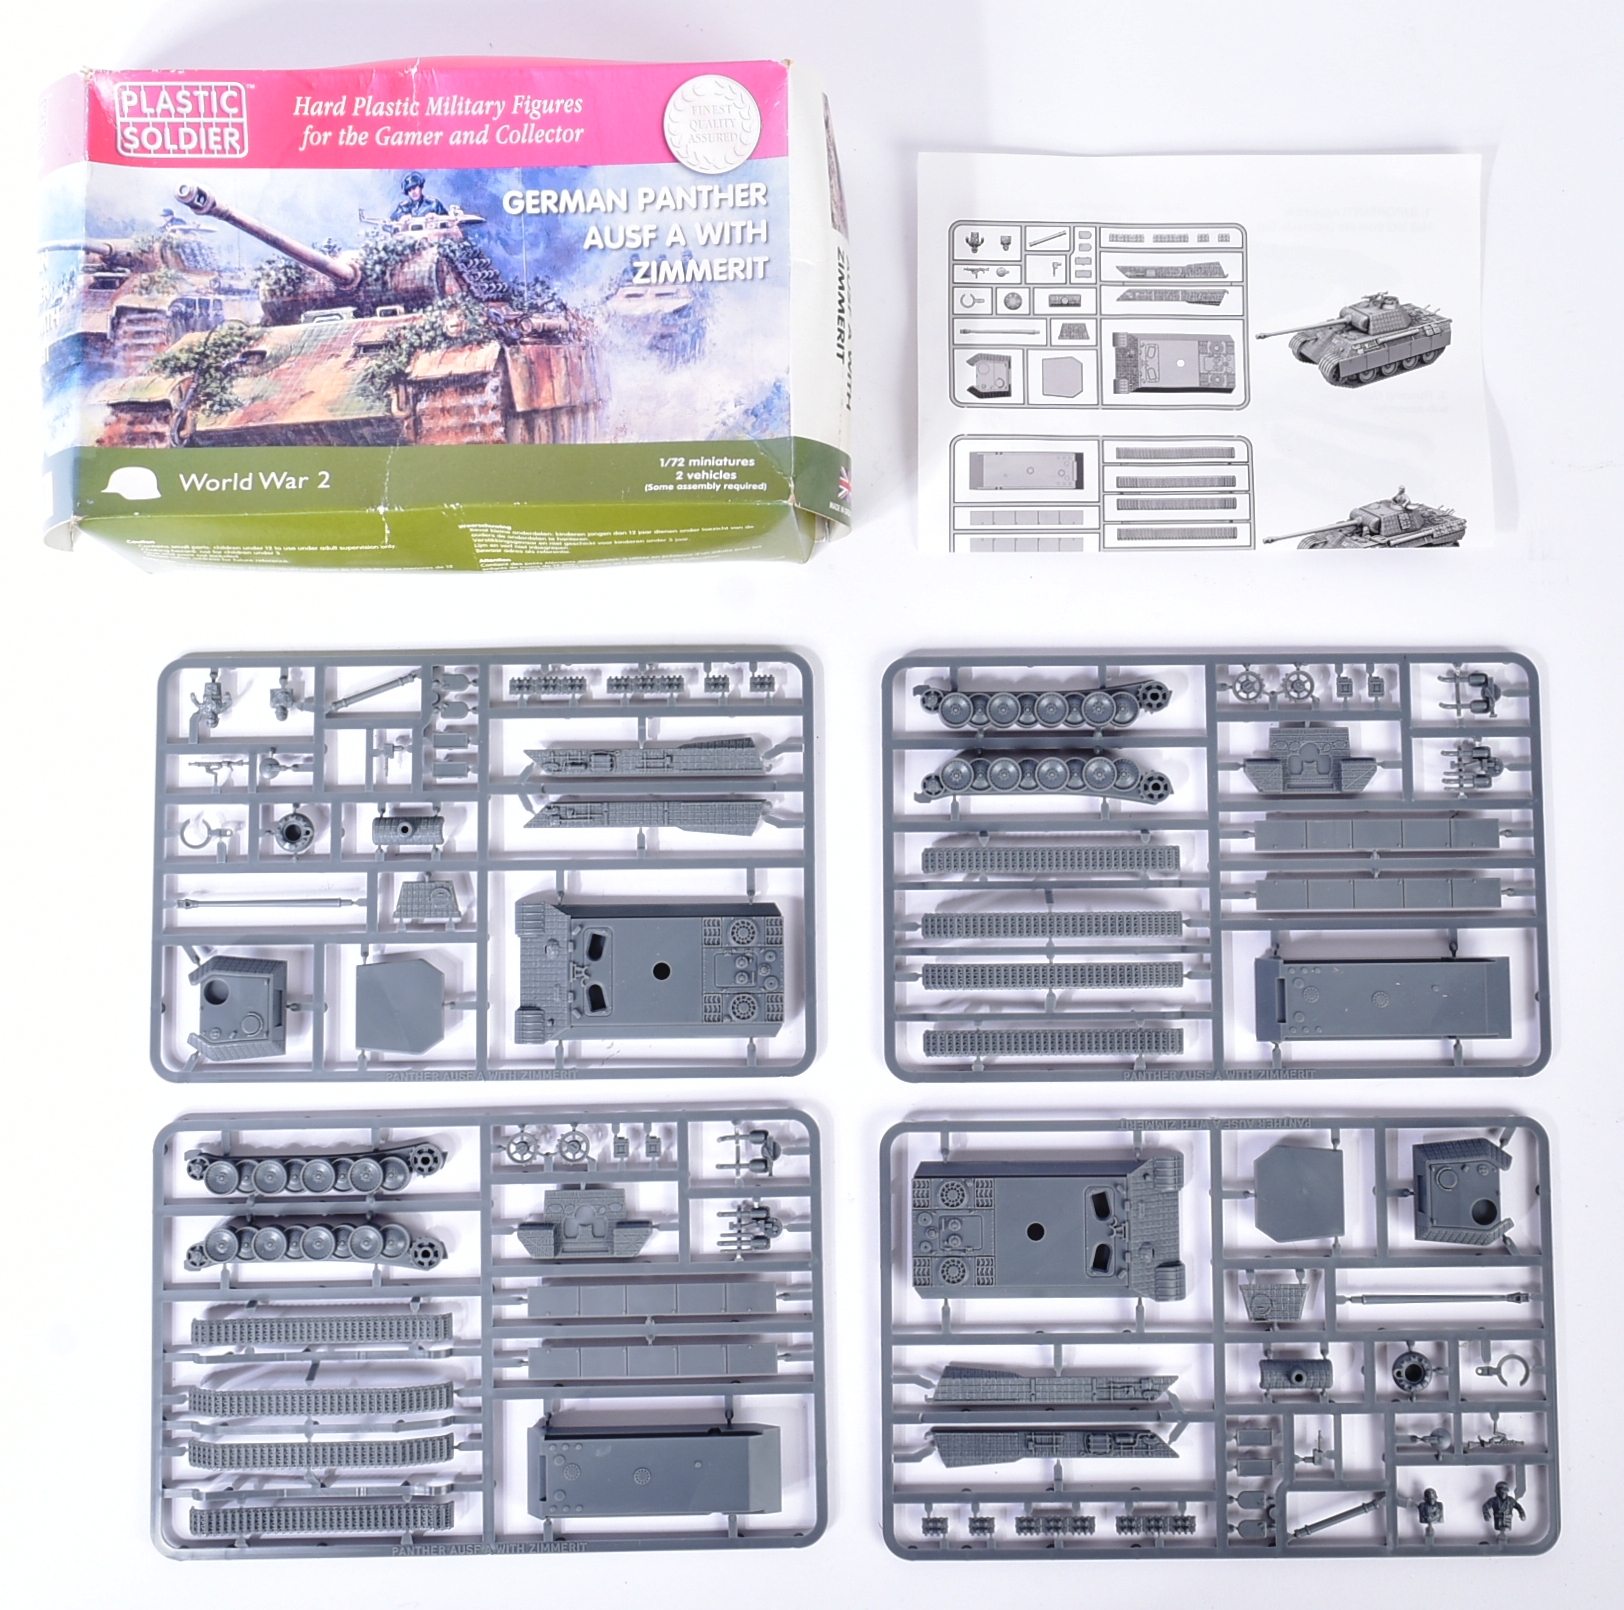 PLASTIC SOLDIER - COLLECTION OF 1:72 MILITARY MODEL KITS - Image 4 of 7